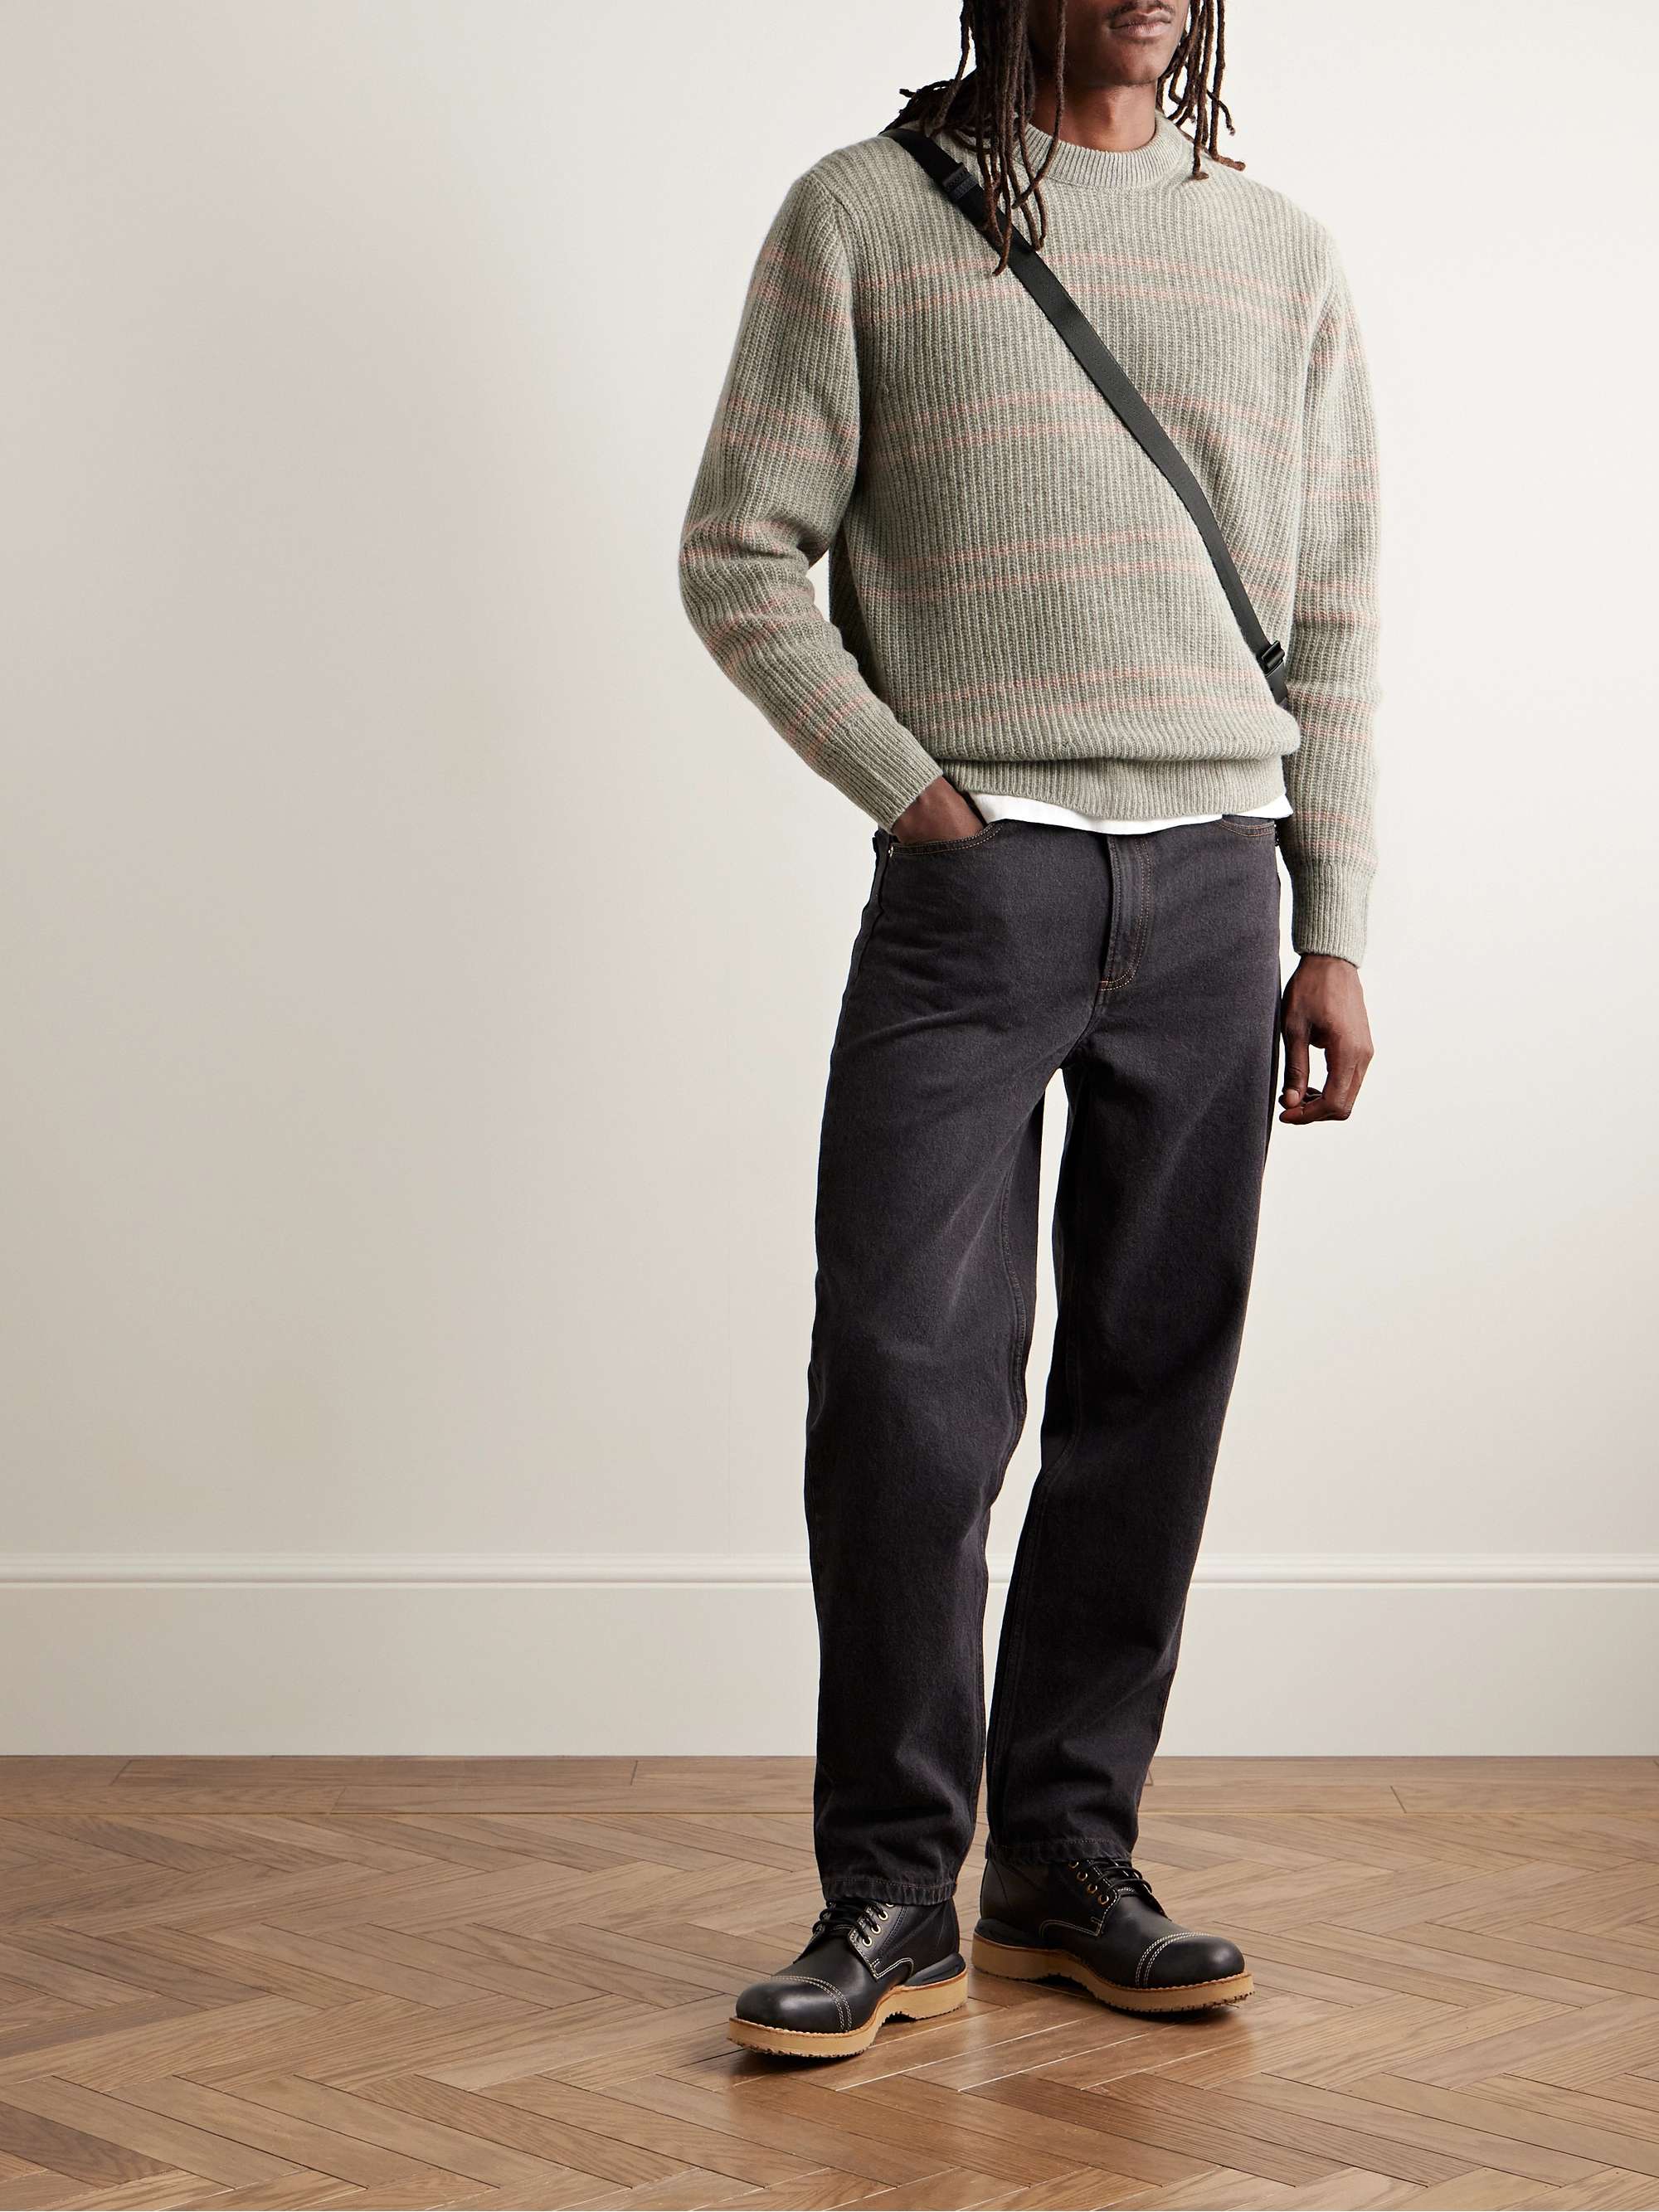 NUDIE JEANS Gurra Striped Ribbed Wool Sweater for Men | MR PORTER